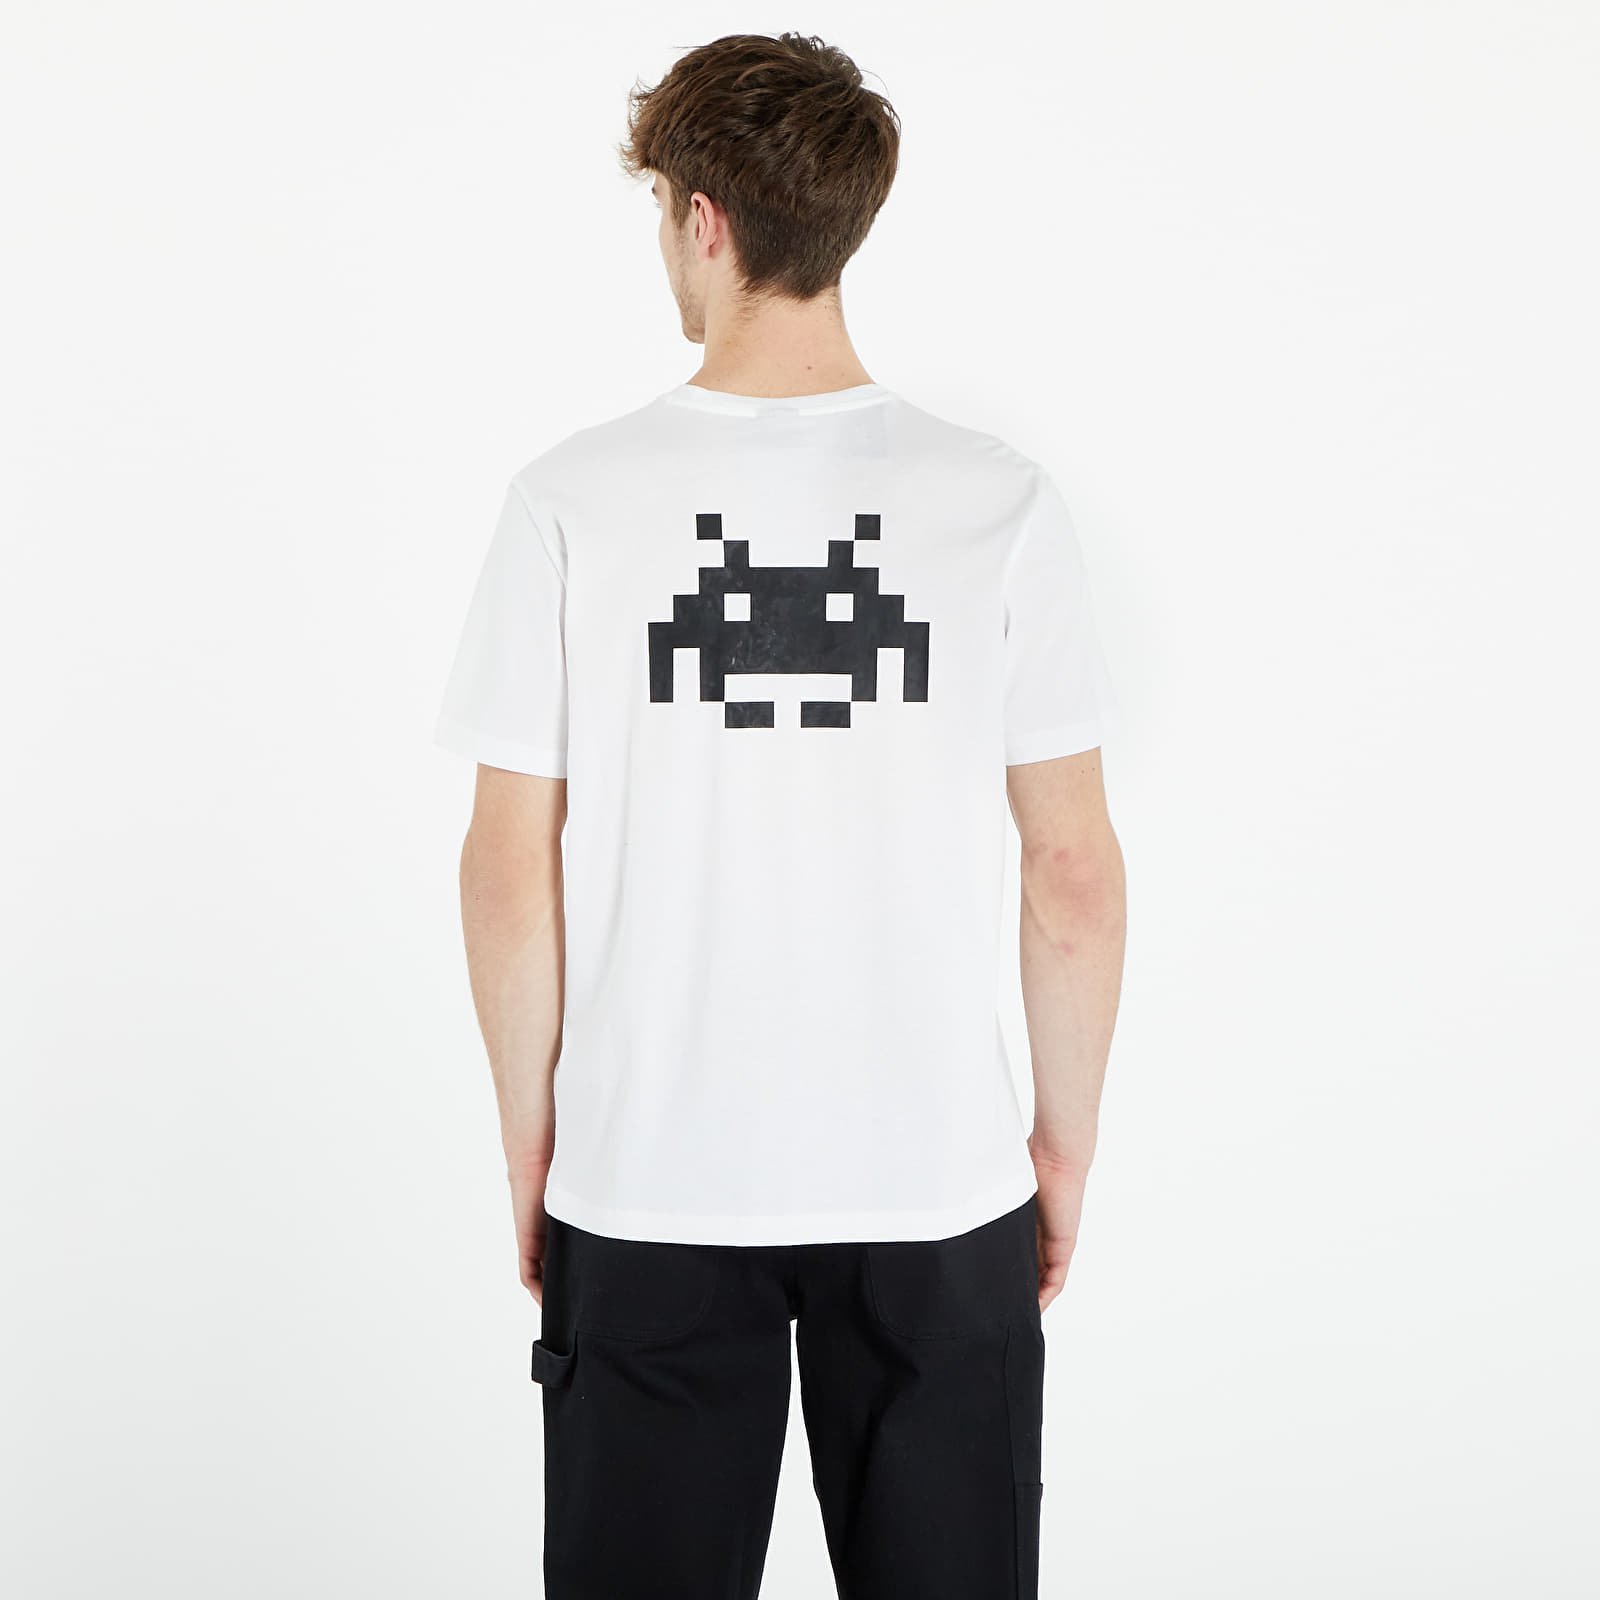 Space Invaders x Crewneck T-Shirt